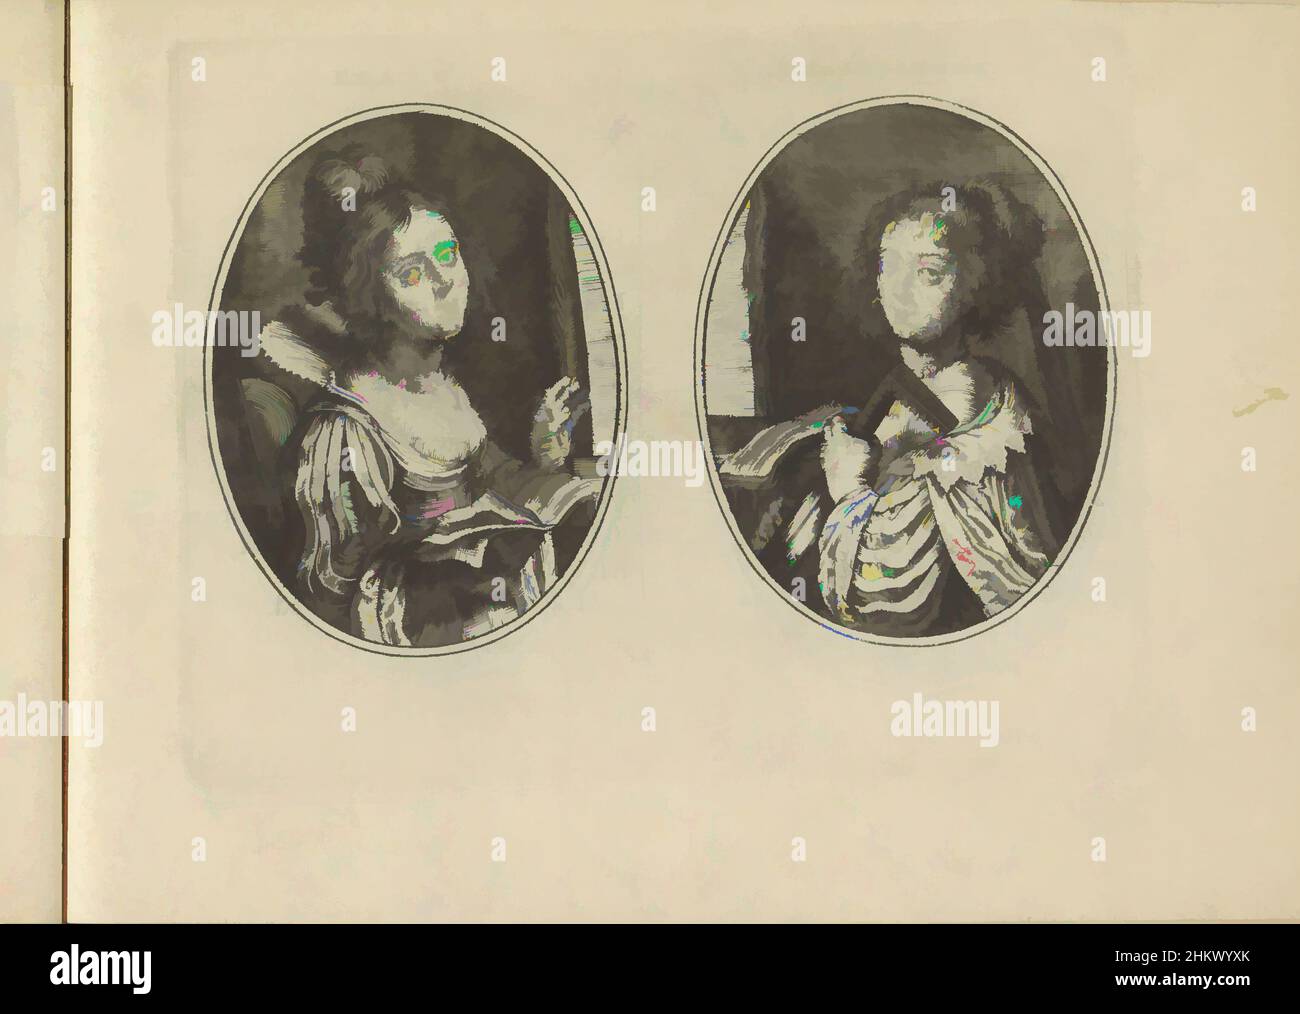 Art inspired by Erato and Terpsichore, Erato, Terpsichore, Les vrais pourtraits de quelques unes des plus grandes dames de la chrestiente desguisees en bergeres. (series title), Two representations on an album leaf. On the left, the muse Erato at a window, holding a music book. On the, Classic works modernized by Artotop with a splash of modernity. Shapes, color and value, eye-catching visual impact on art. Emotions through freedom of artworks in a contemporary way. A timeless message pursuing a wildly creative new direction. Artists turning to the digital medium and creating the Artotop NFT Stock Photo